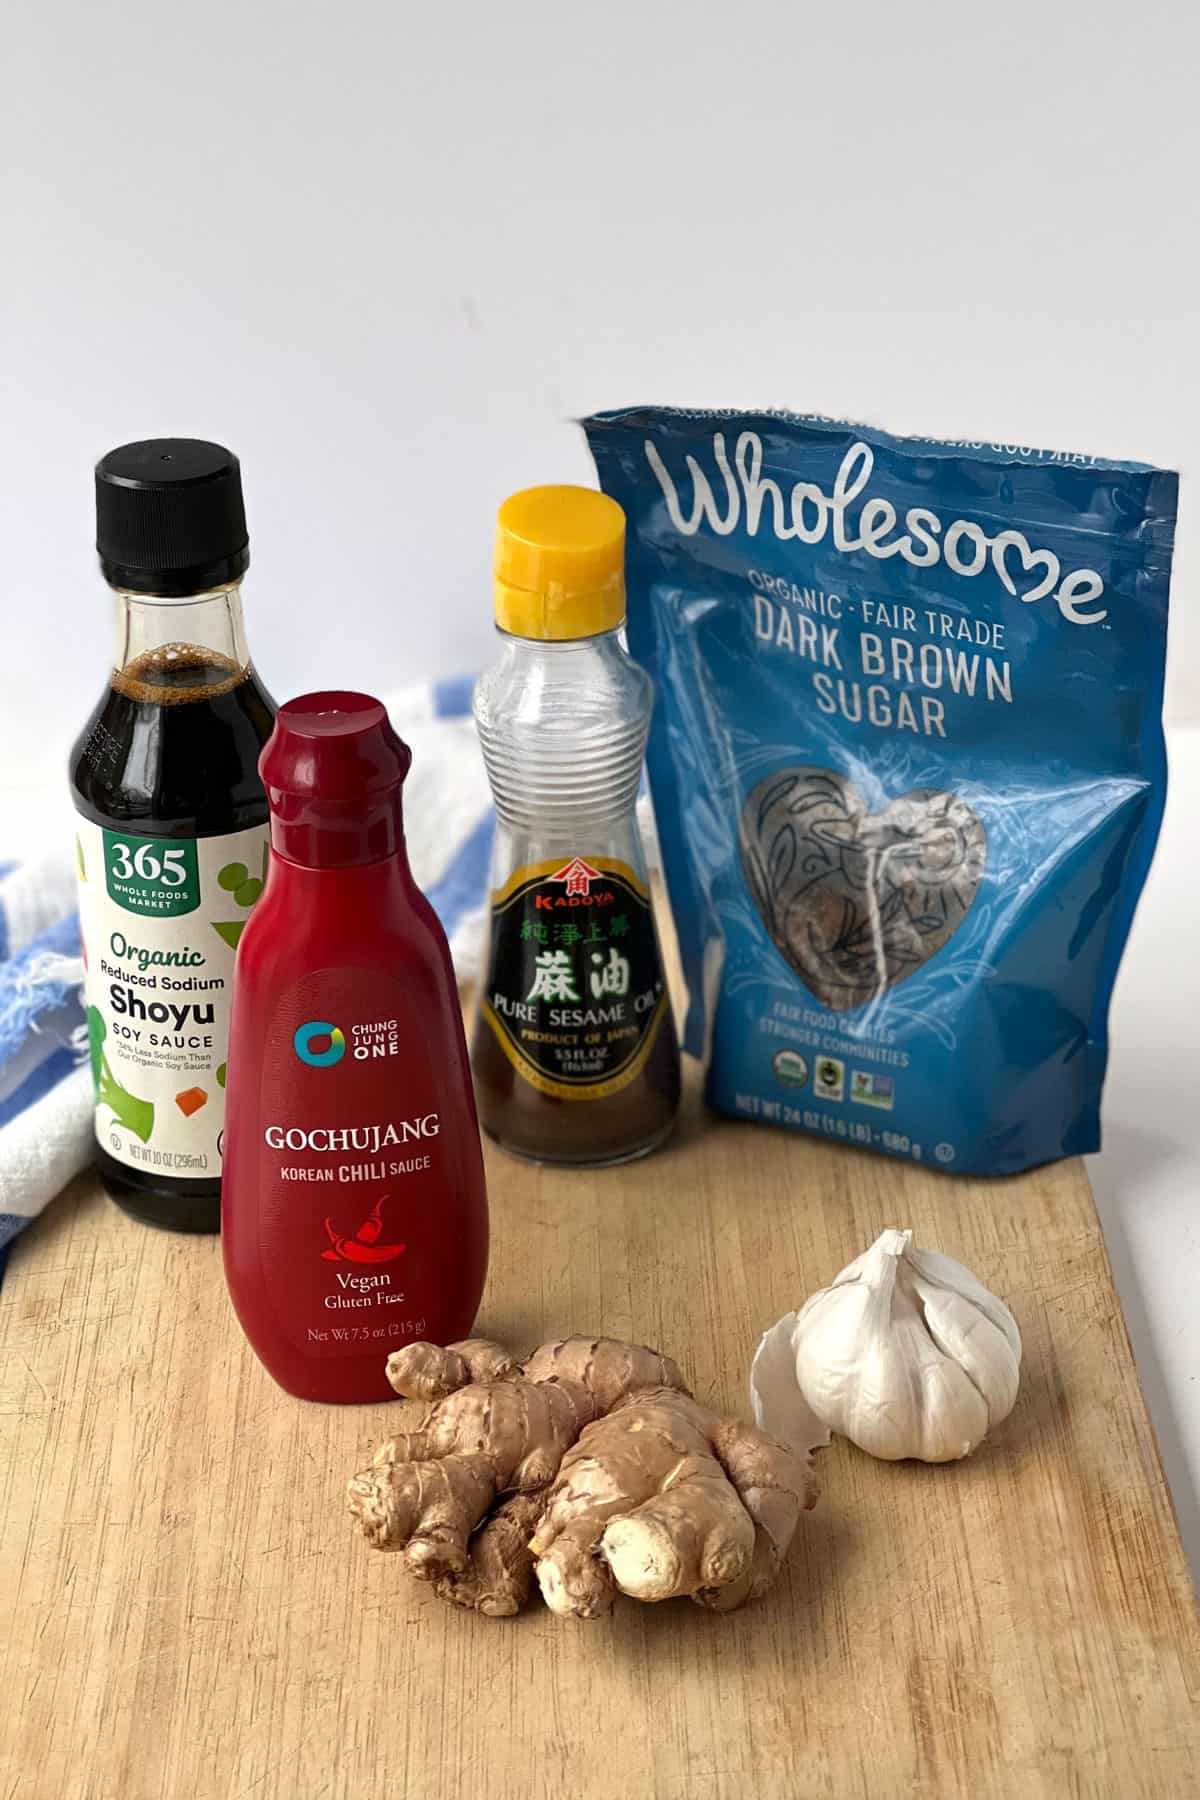 ingredients for gochujang sauce on a wooden cutting board: bottle of soy sauce, bottle of gochujang sauce, bottle of sesame oil, bag of dark brown sugar, whole bulb of garlic, hunk of ginger root